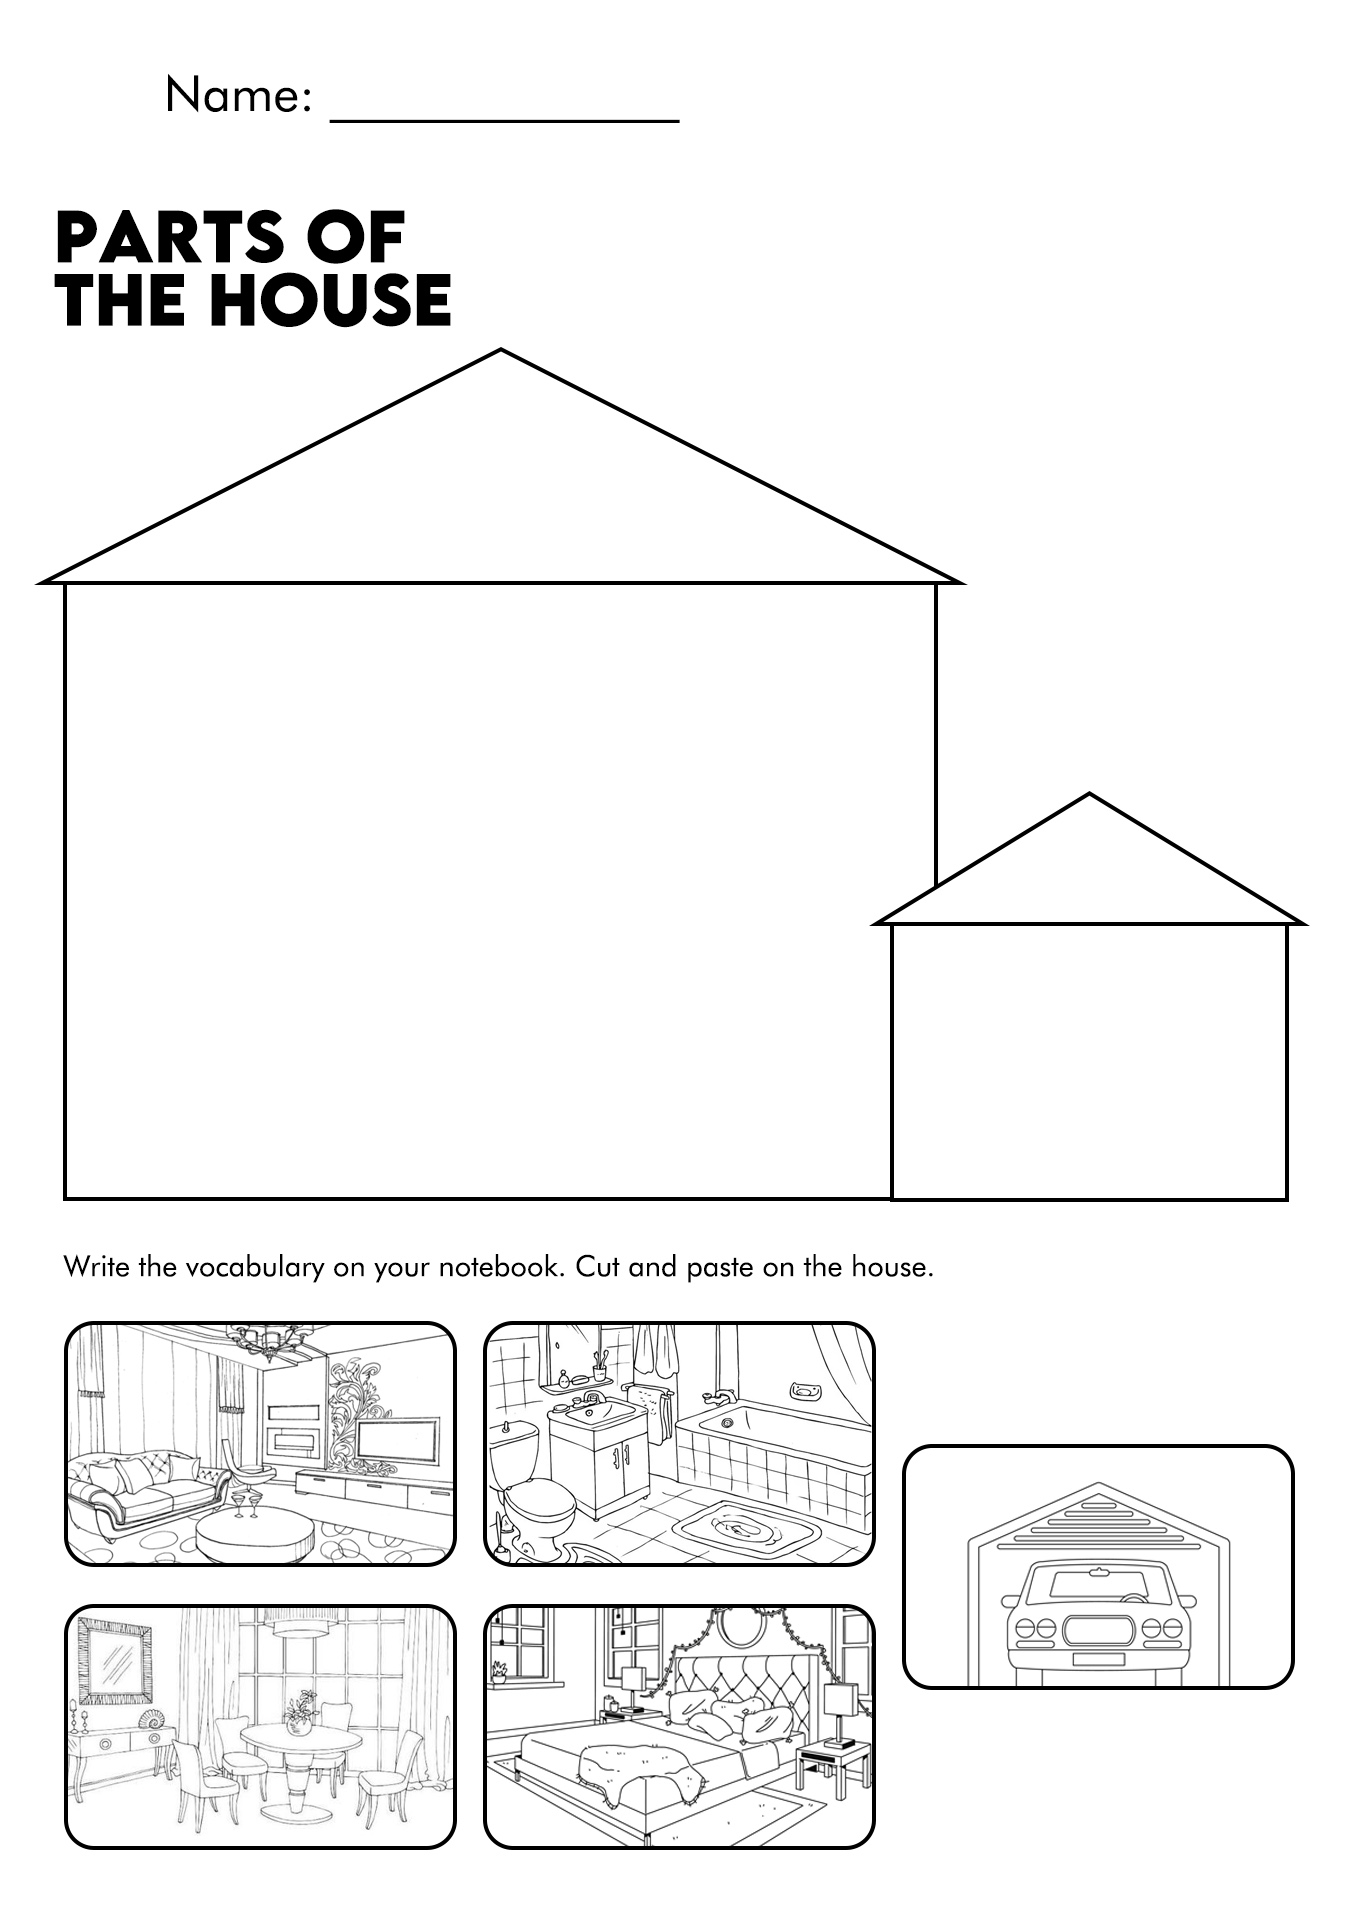 Printable Cut and Paste Parts of a House Image